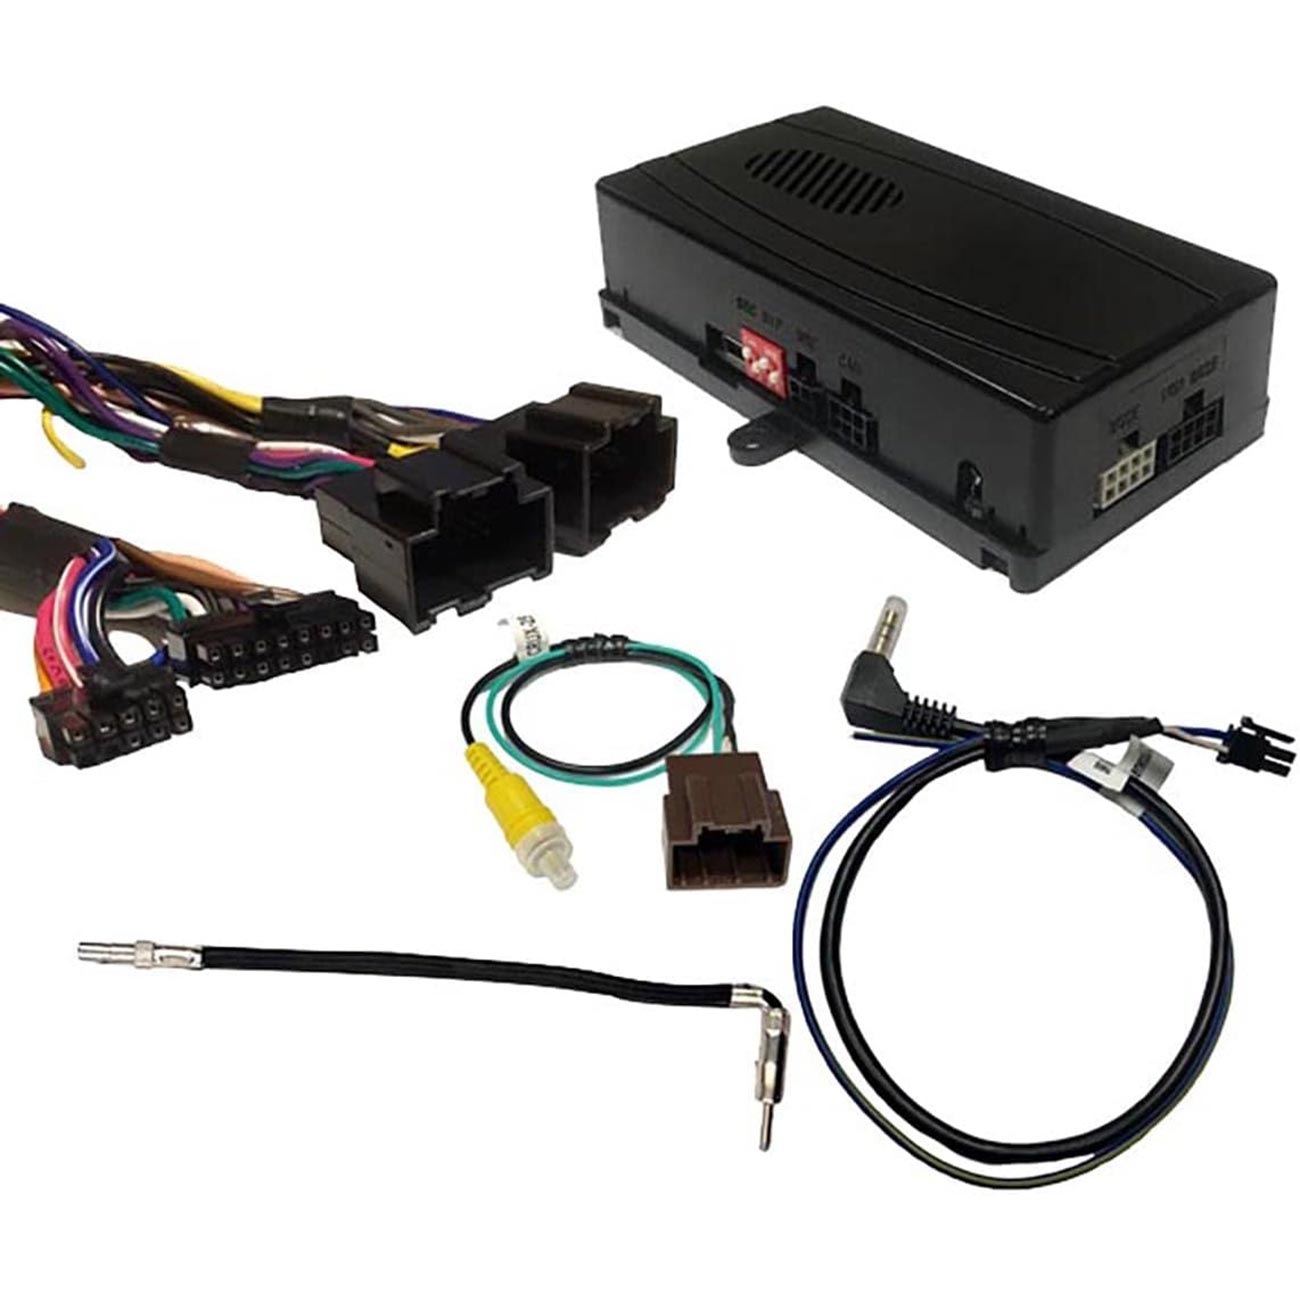 Crux Radio Replacement Interface with OnStar & SWC Retention for Select 7" GM IOA & IOB Vehicles